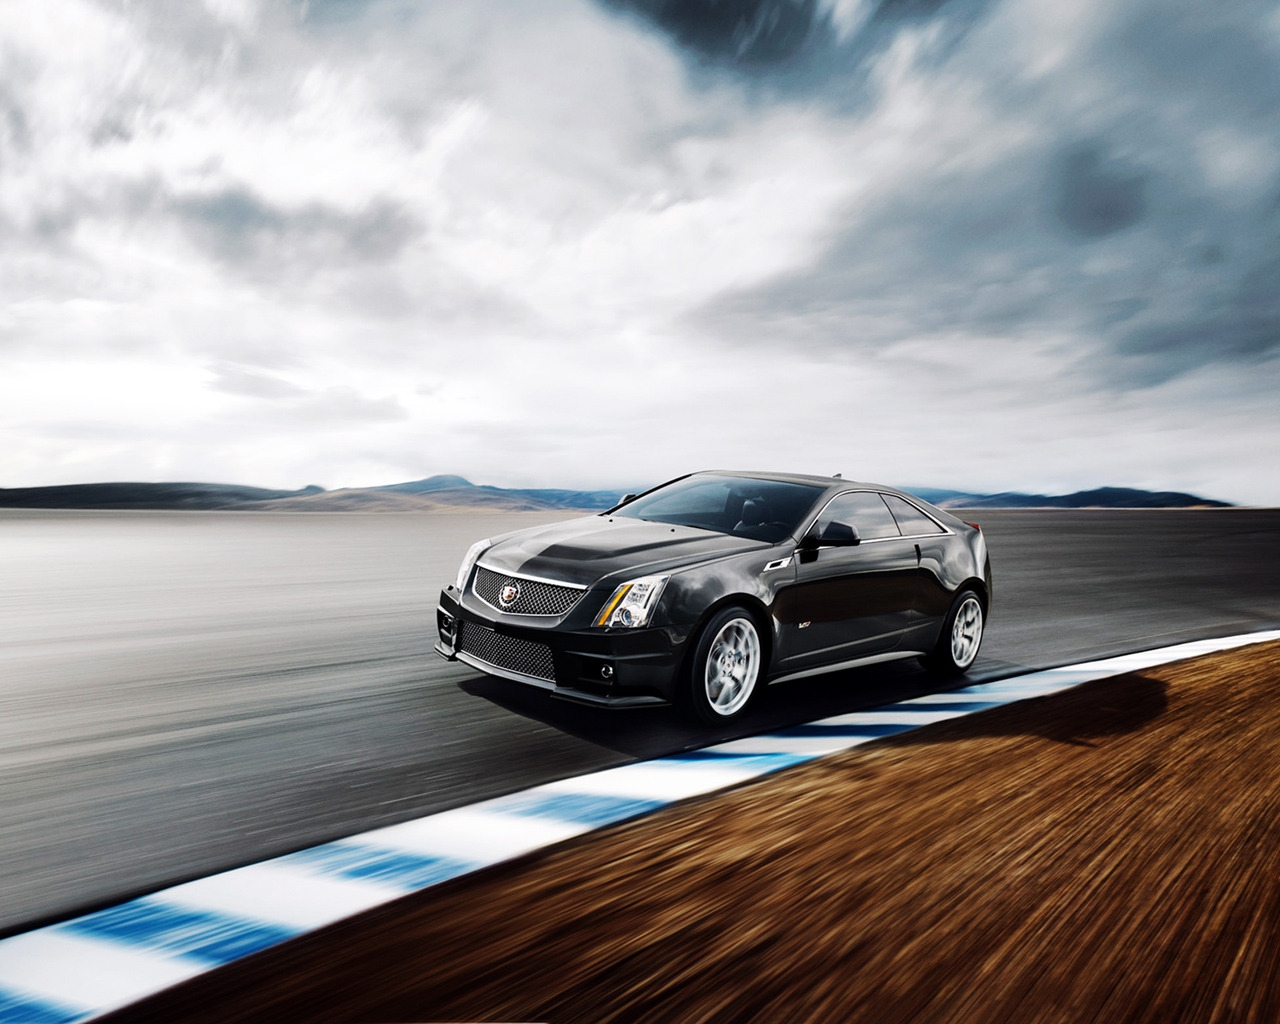 2011 Cadillac CTS V Coupe for 1280 x 1024 resolution